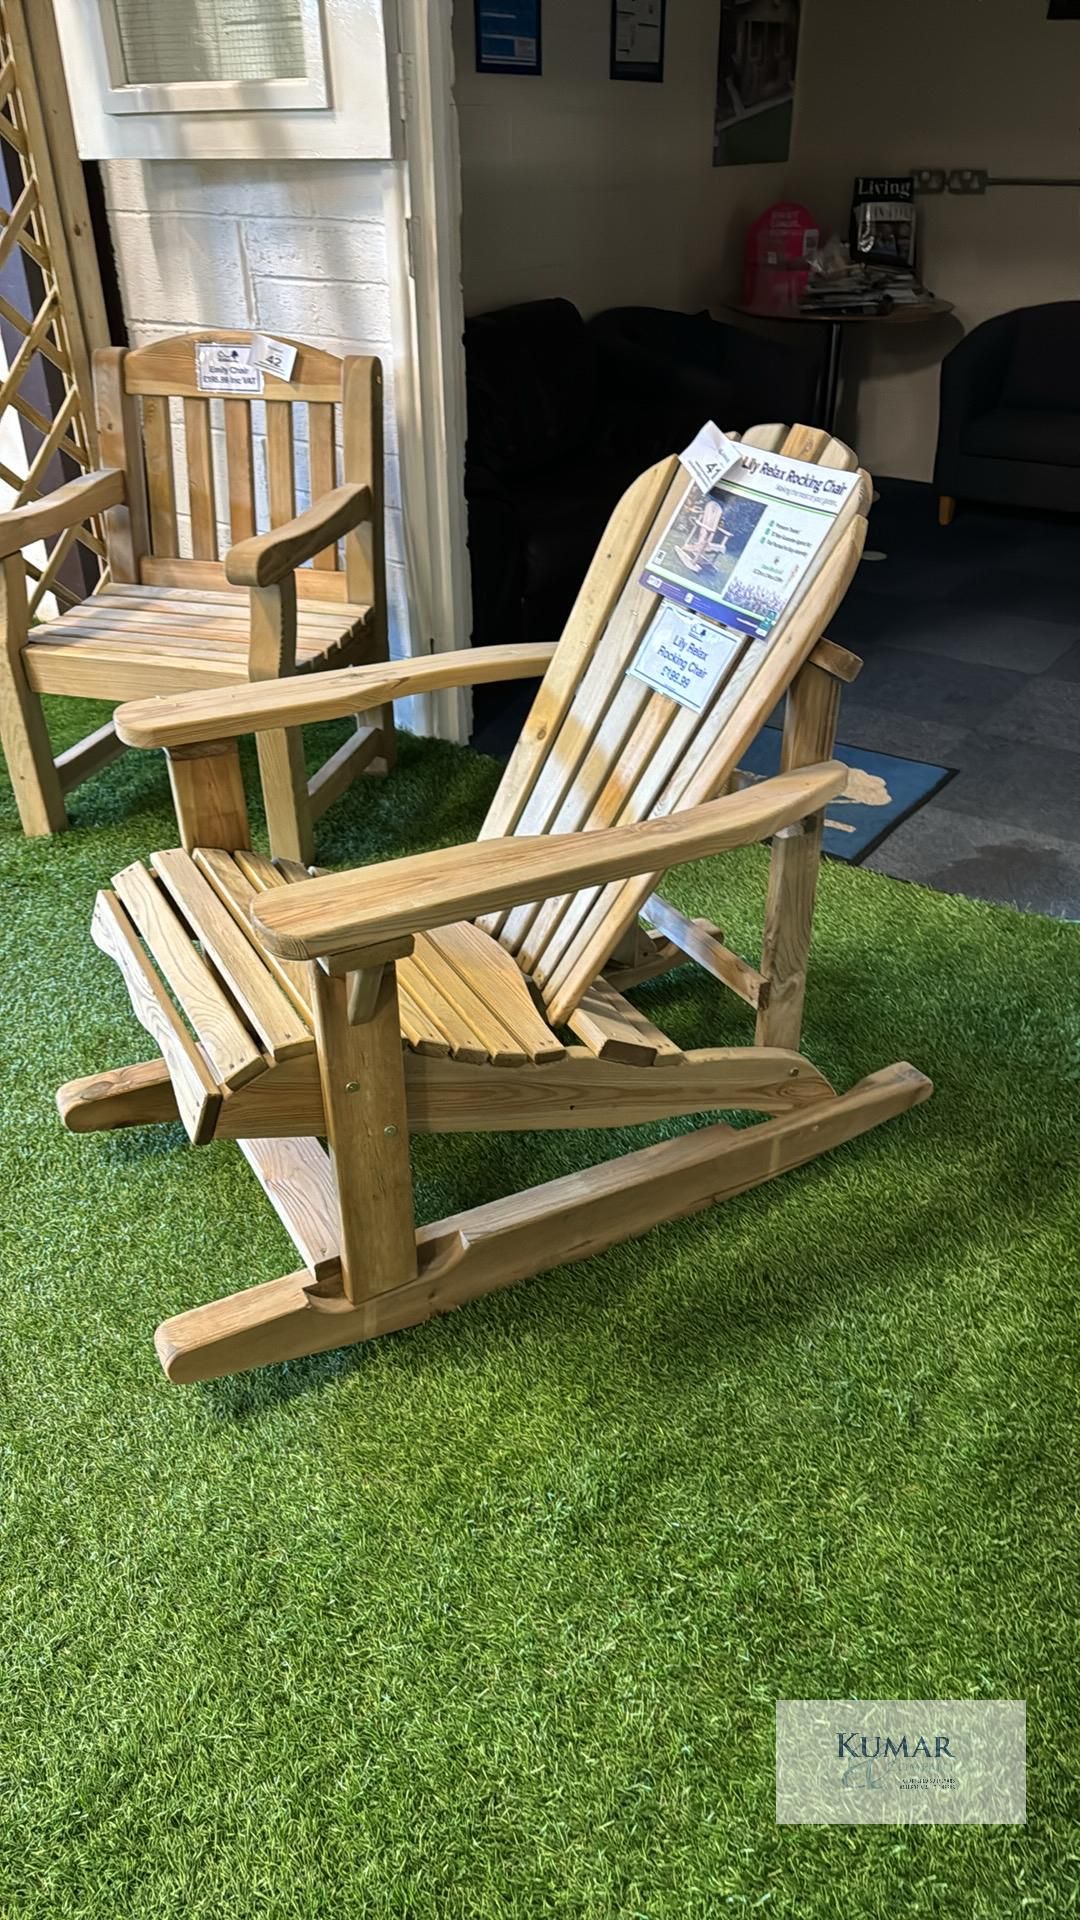 Lily Relax Rocking Chair, Sizes (W x D x H) 0.72m x 1.14m x 0.99m RRP £199.99 - Image 4 of 7